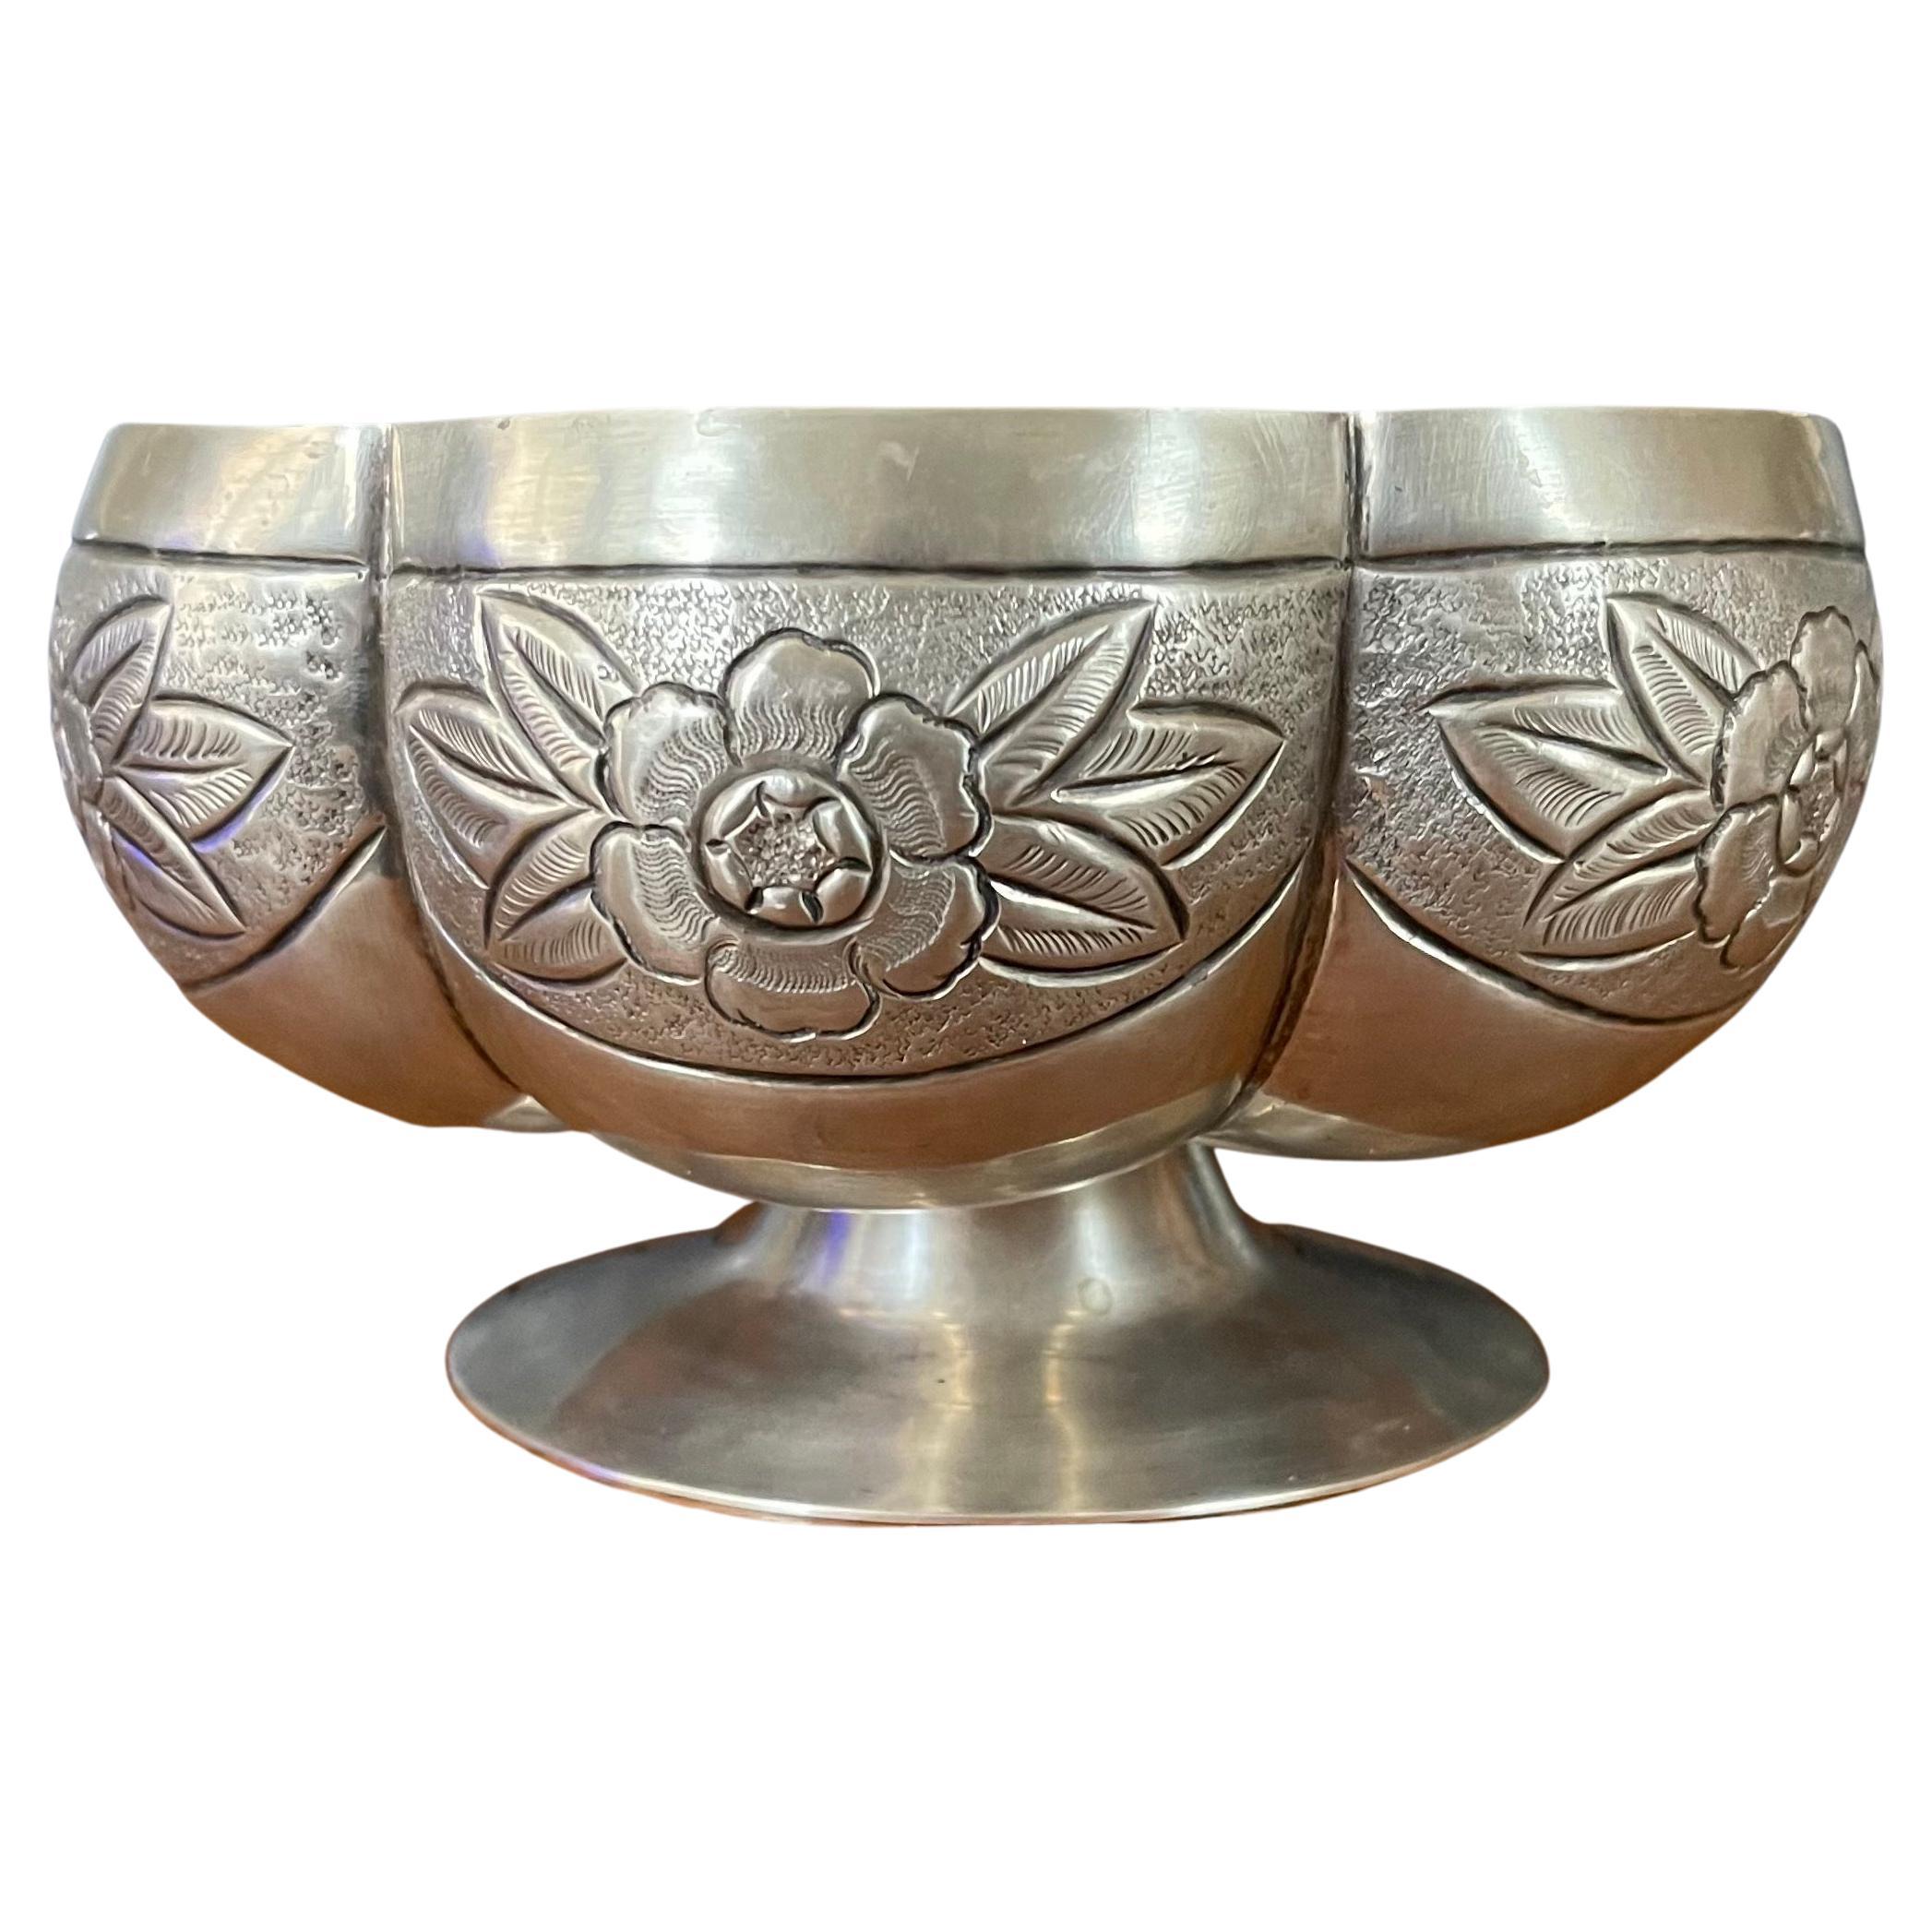 A beautiful Mexican sterling silver pedestal bowl with floral motif by Maciel, circa 1960s. This highly crafted piece is in very good vintage condition and measures 7.5